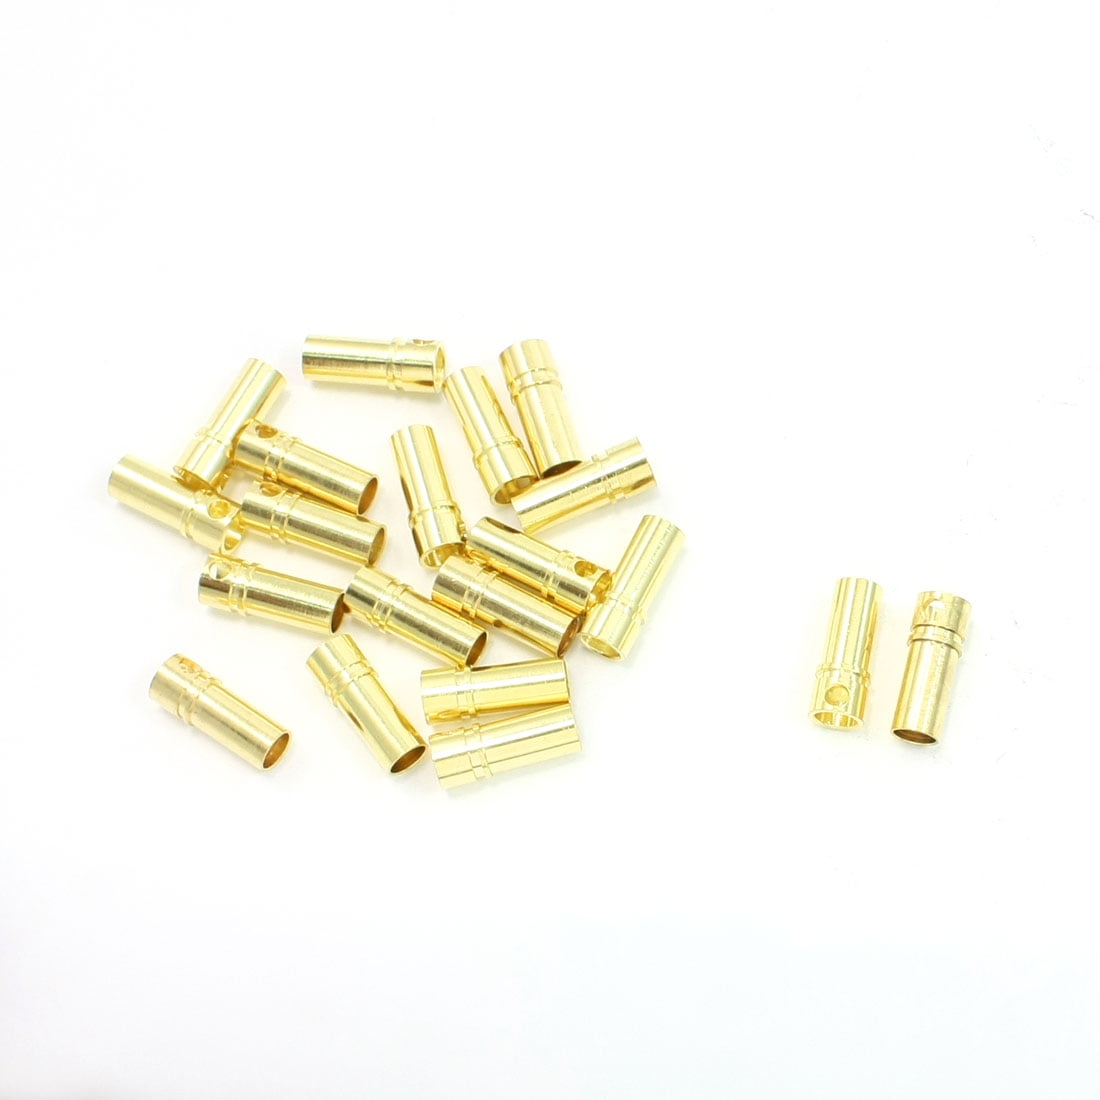 20 Pcs Female Bullet Connector Plug Replacement 3.5mm for RC DIY